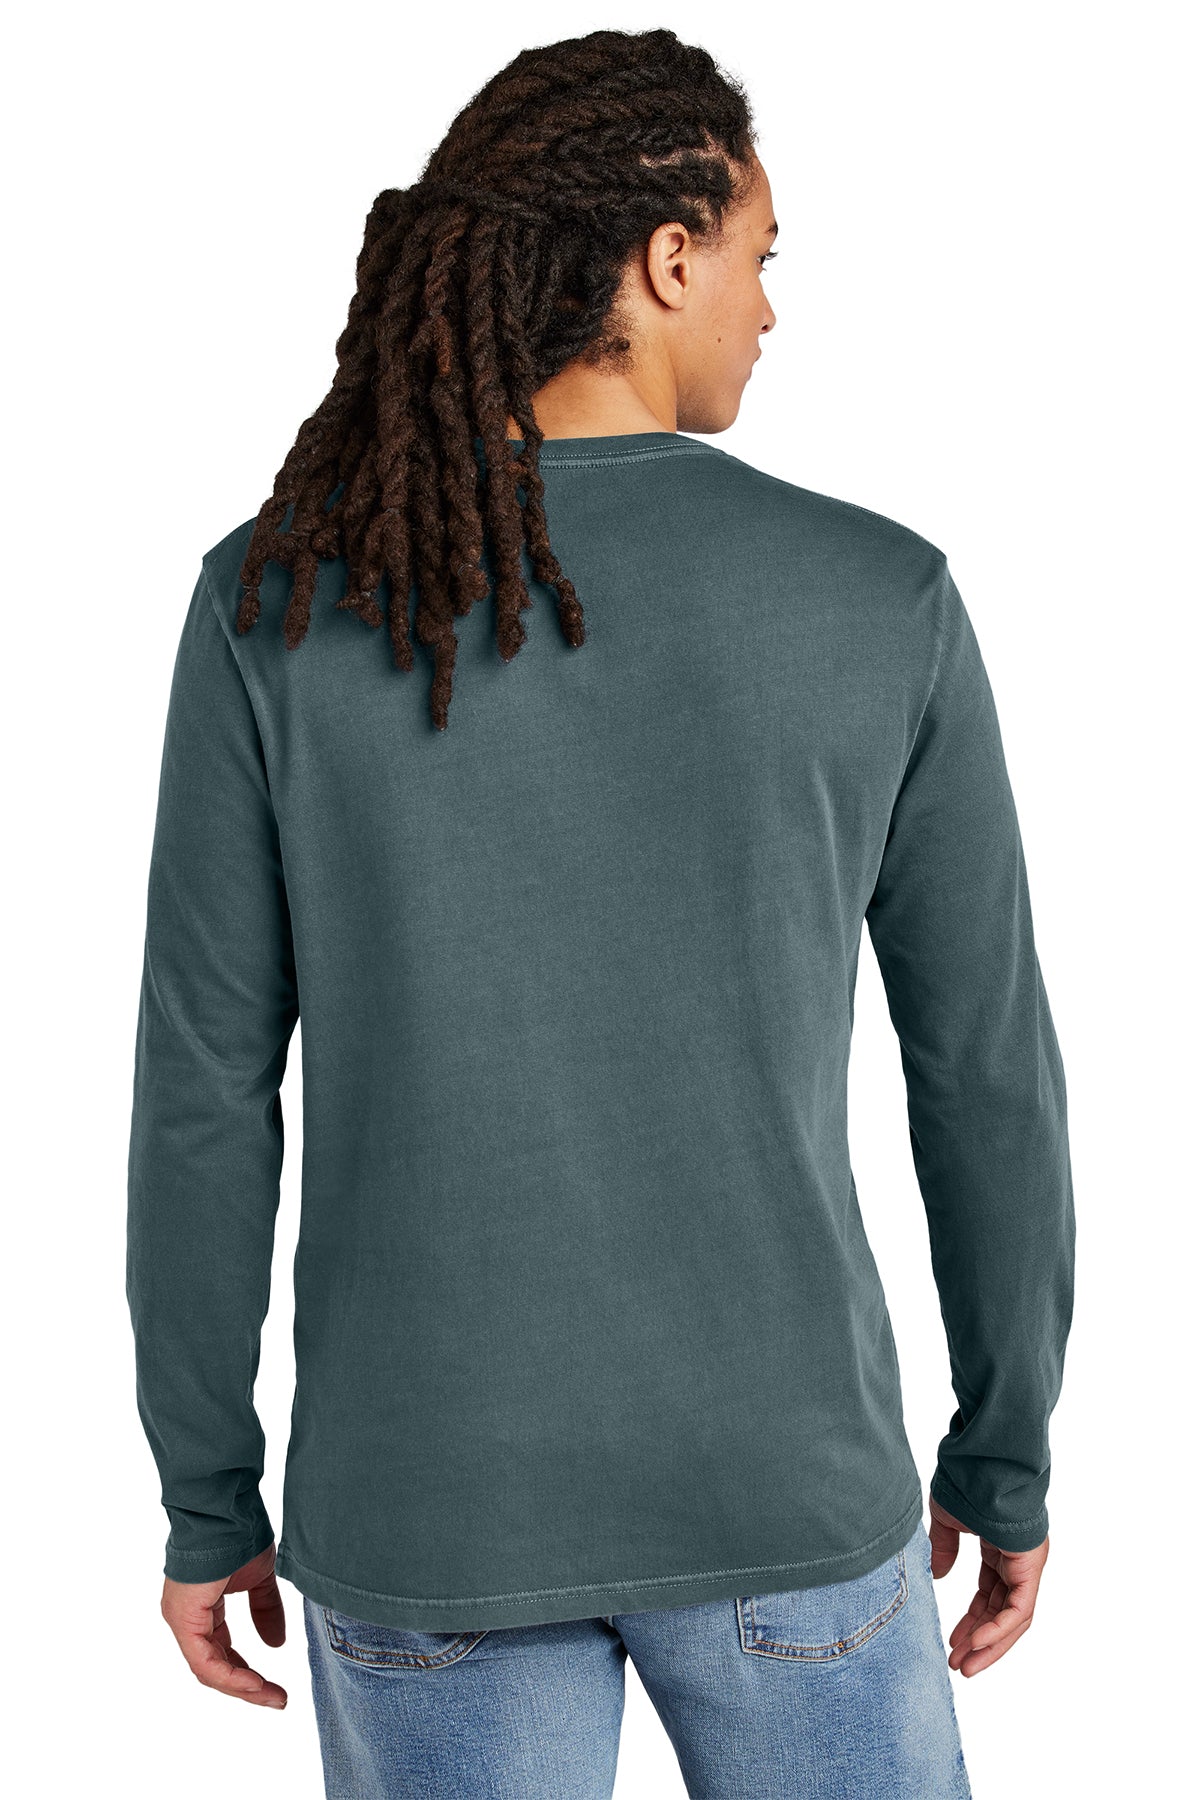 DT2103 District Wash™ Long Sleeve Tee